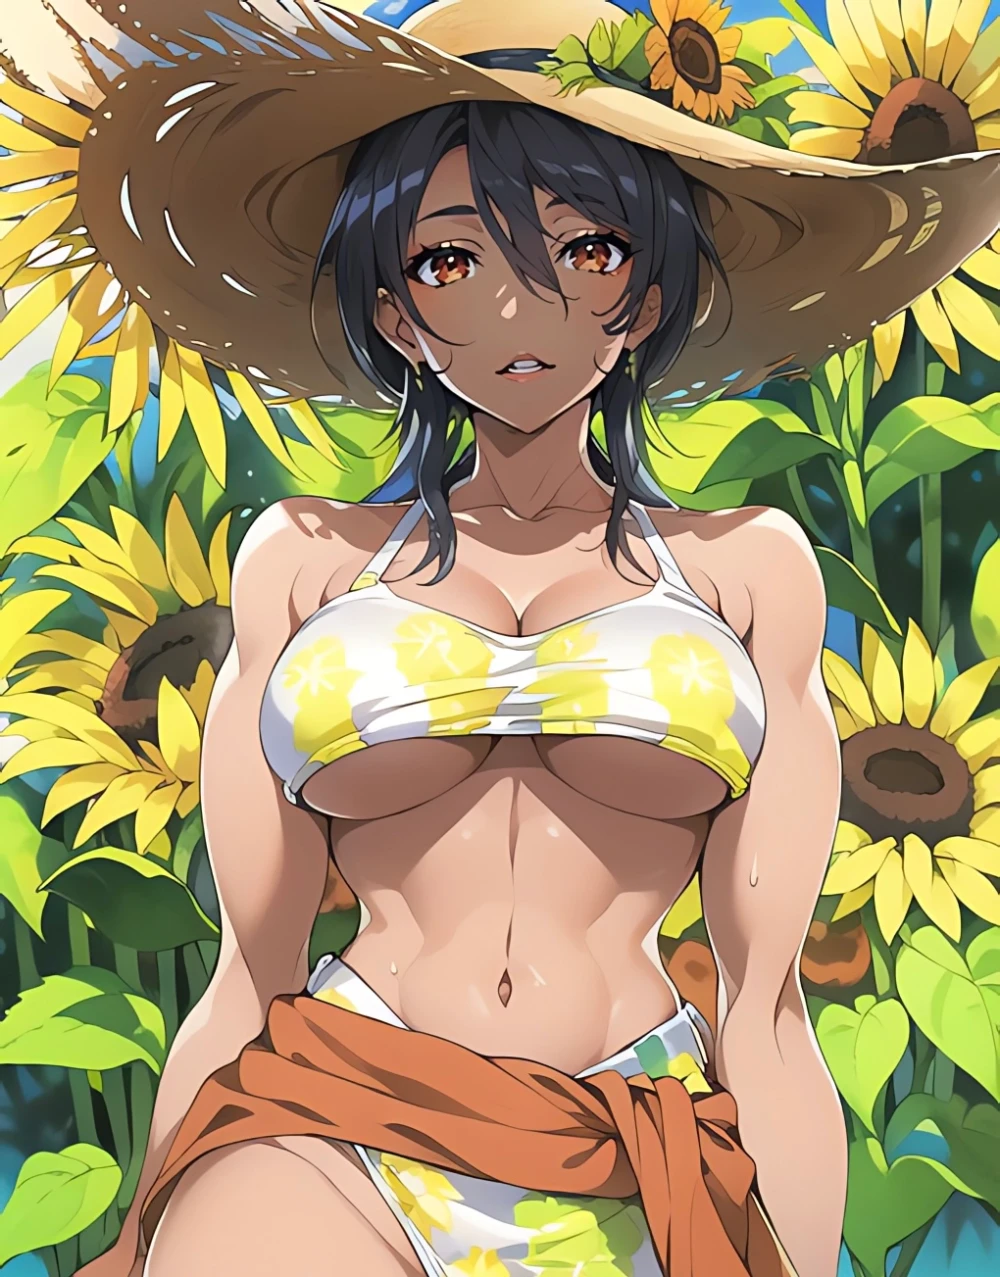 straw-hat -anime-style-all-ages-40